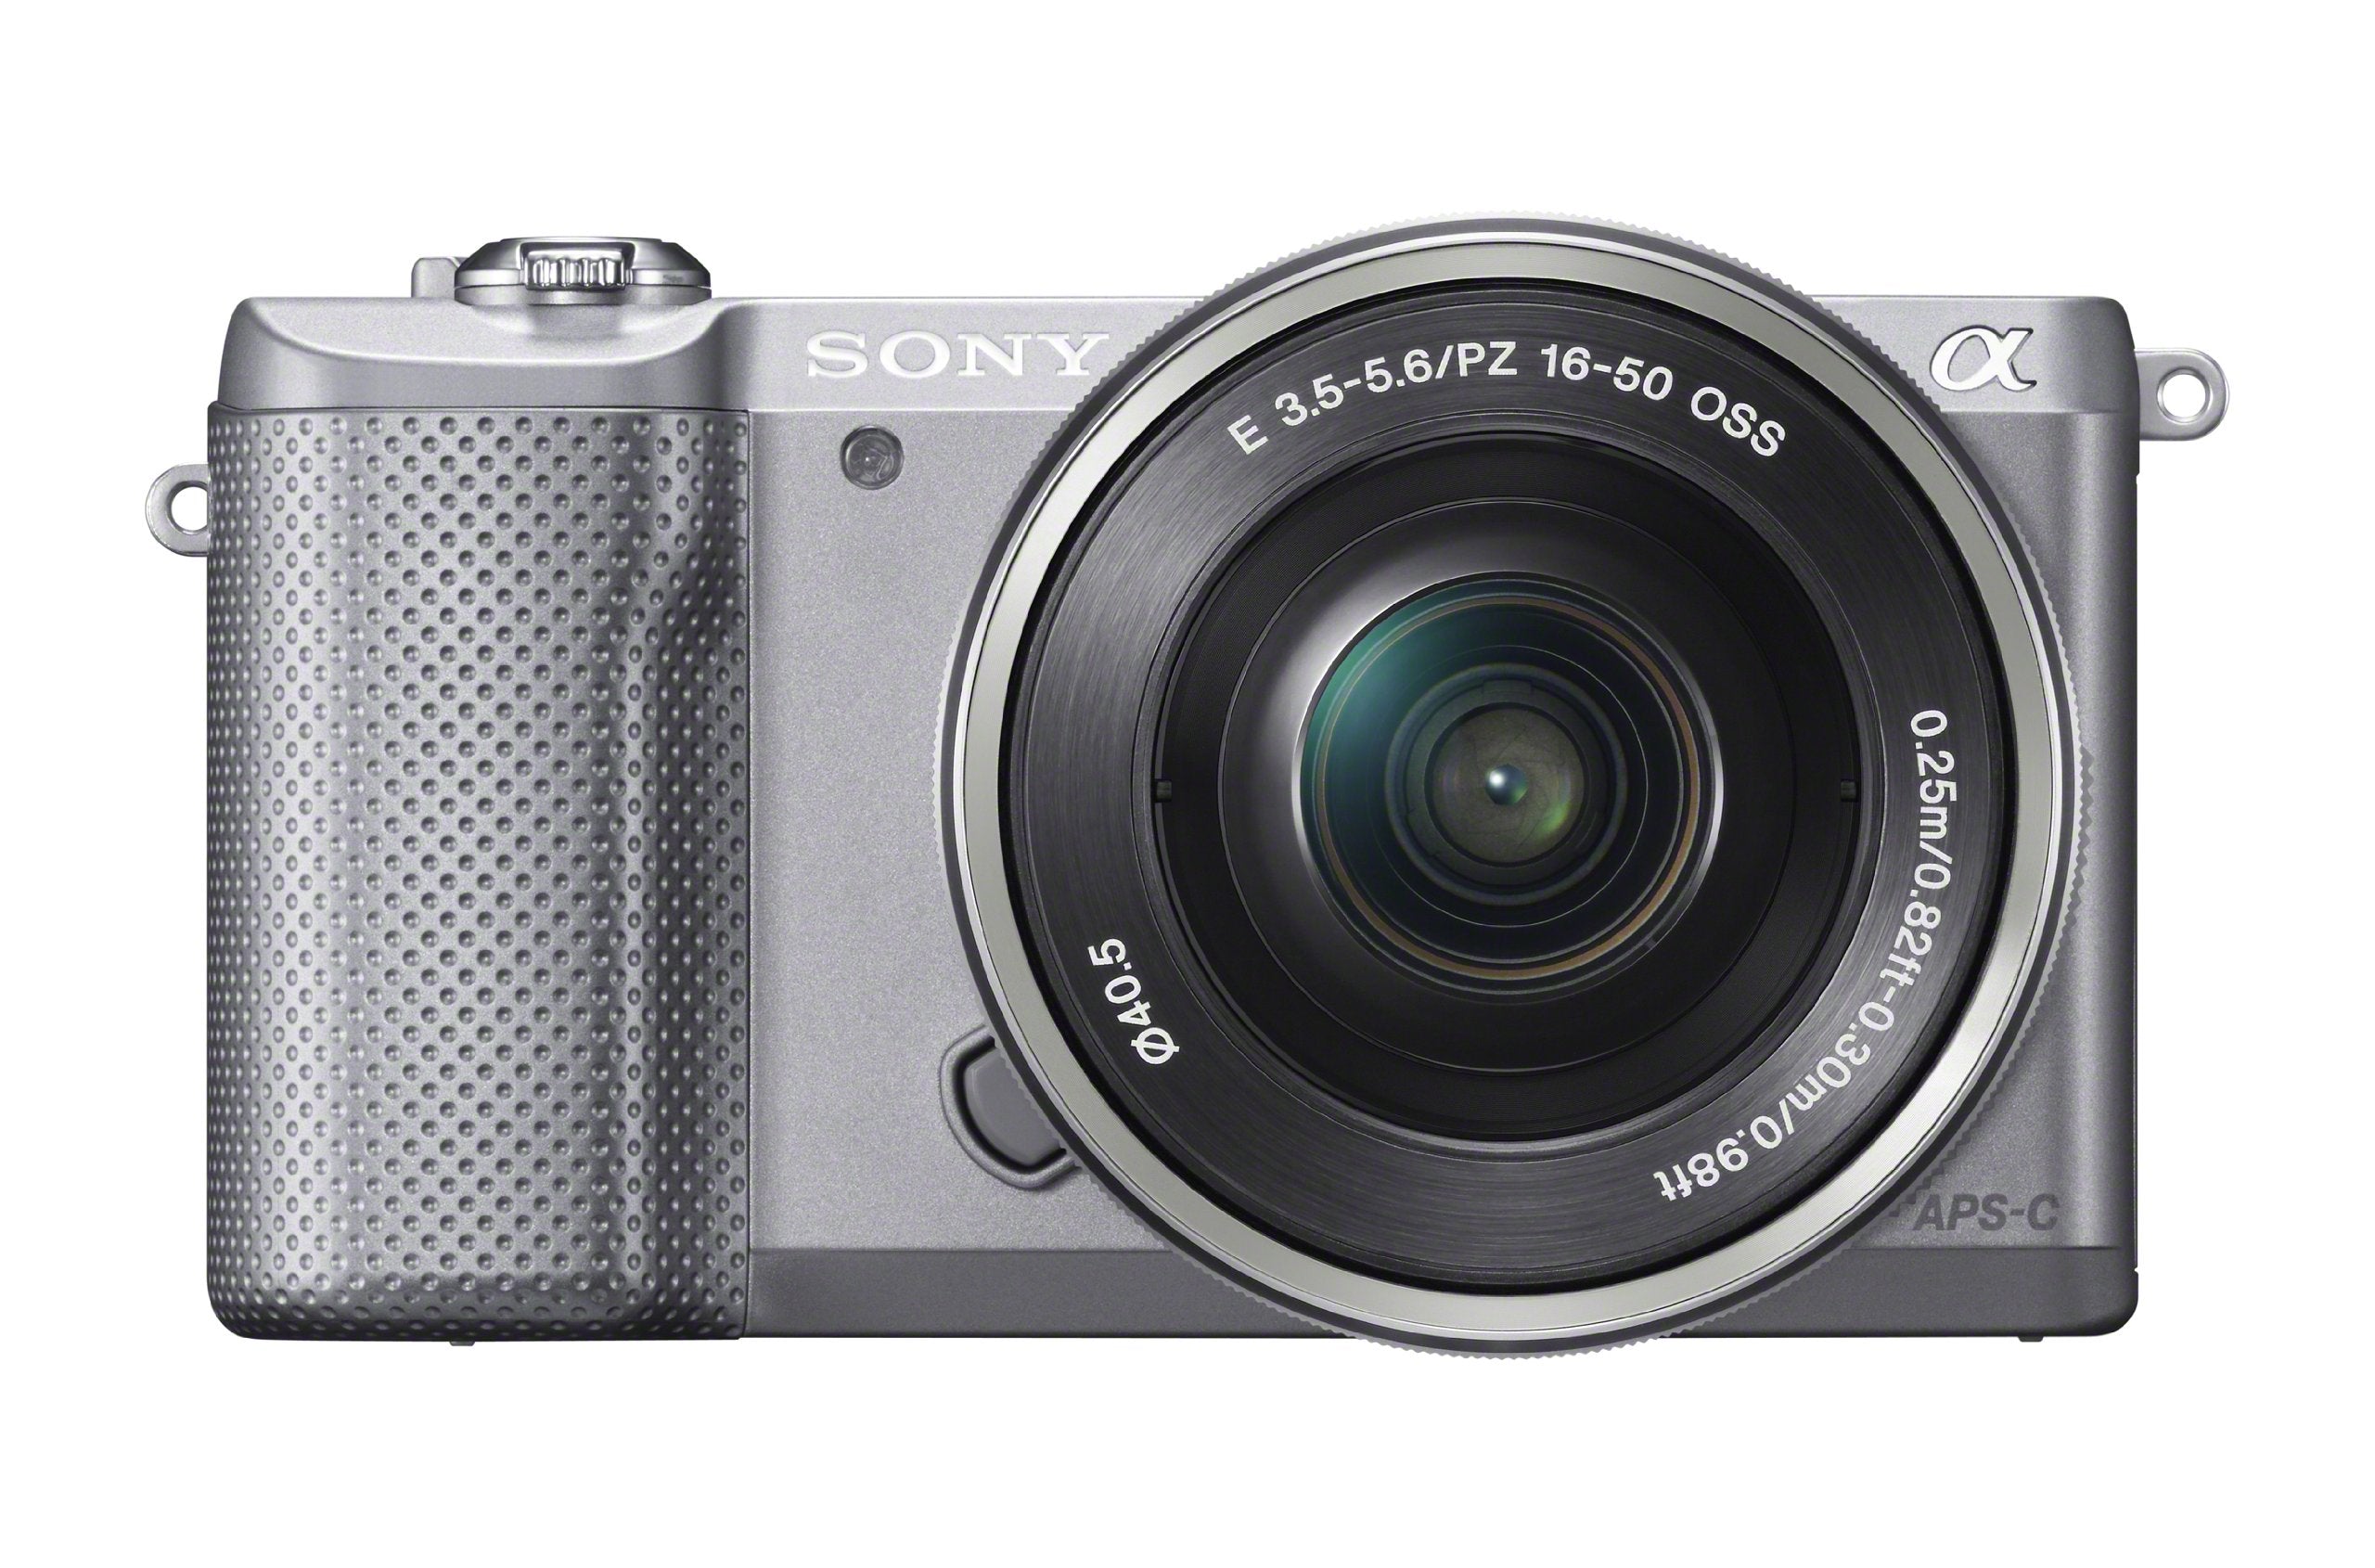 Sony Alpha a5000 Mirrorless Digital Camera with 16-50mm OSS Lens (Silver)